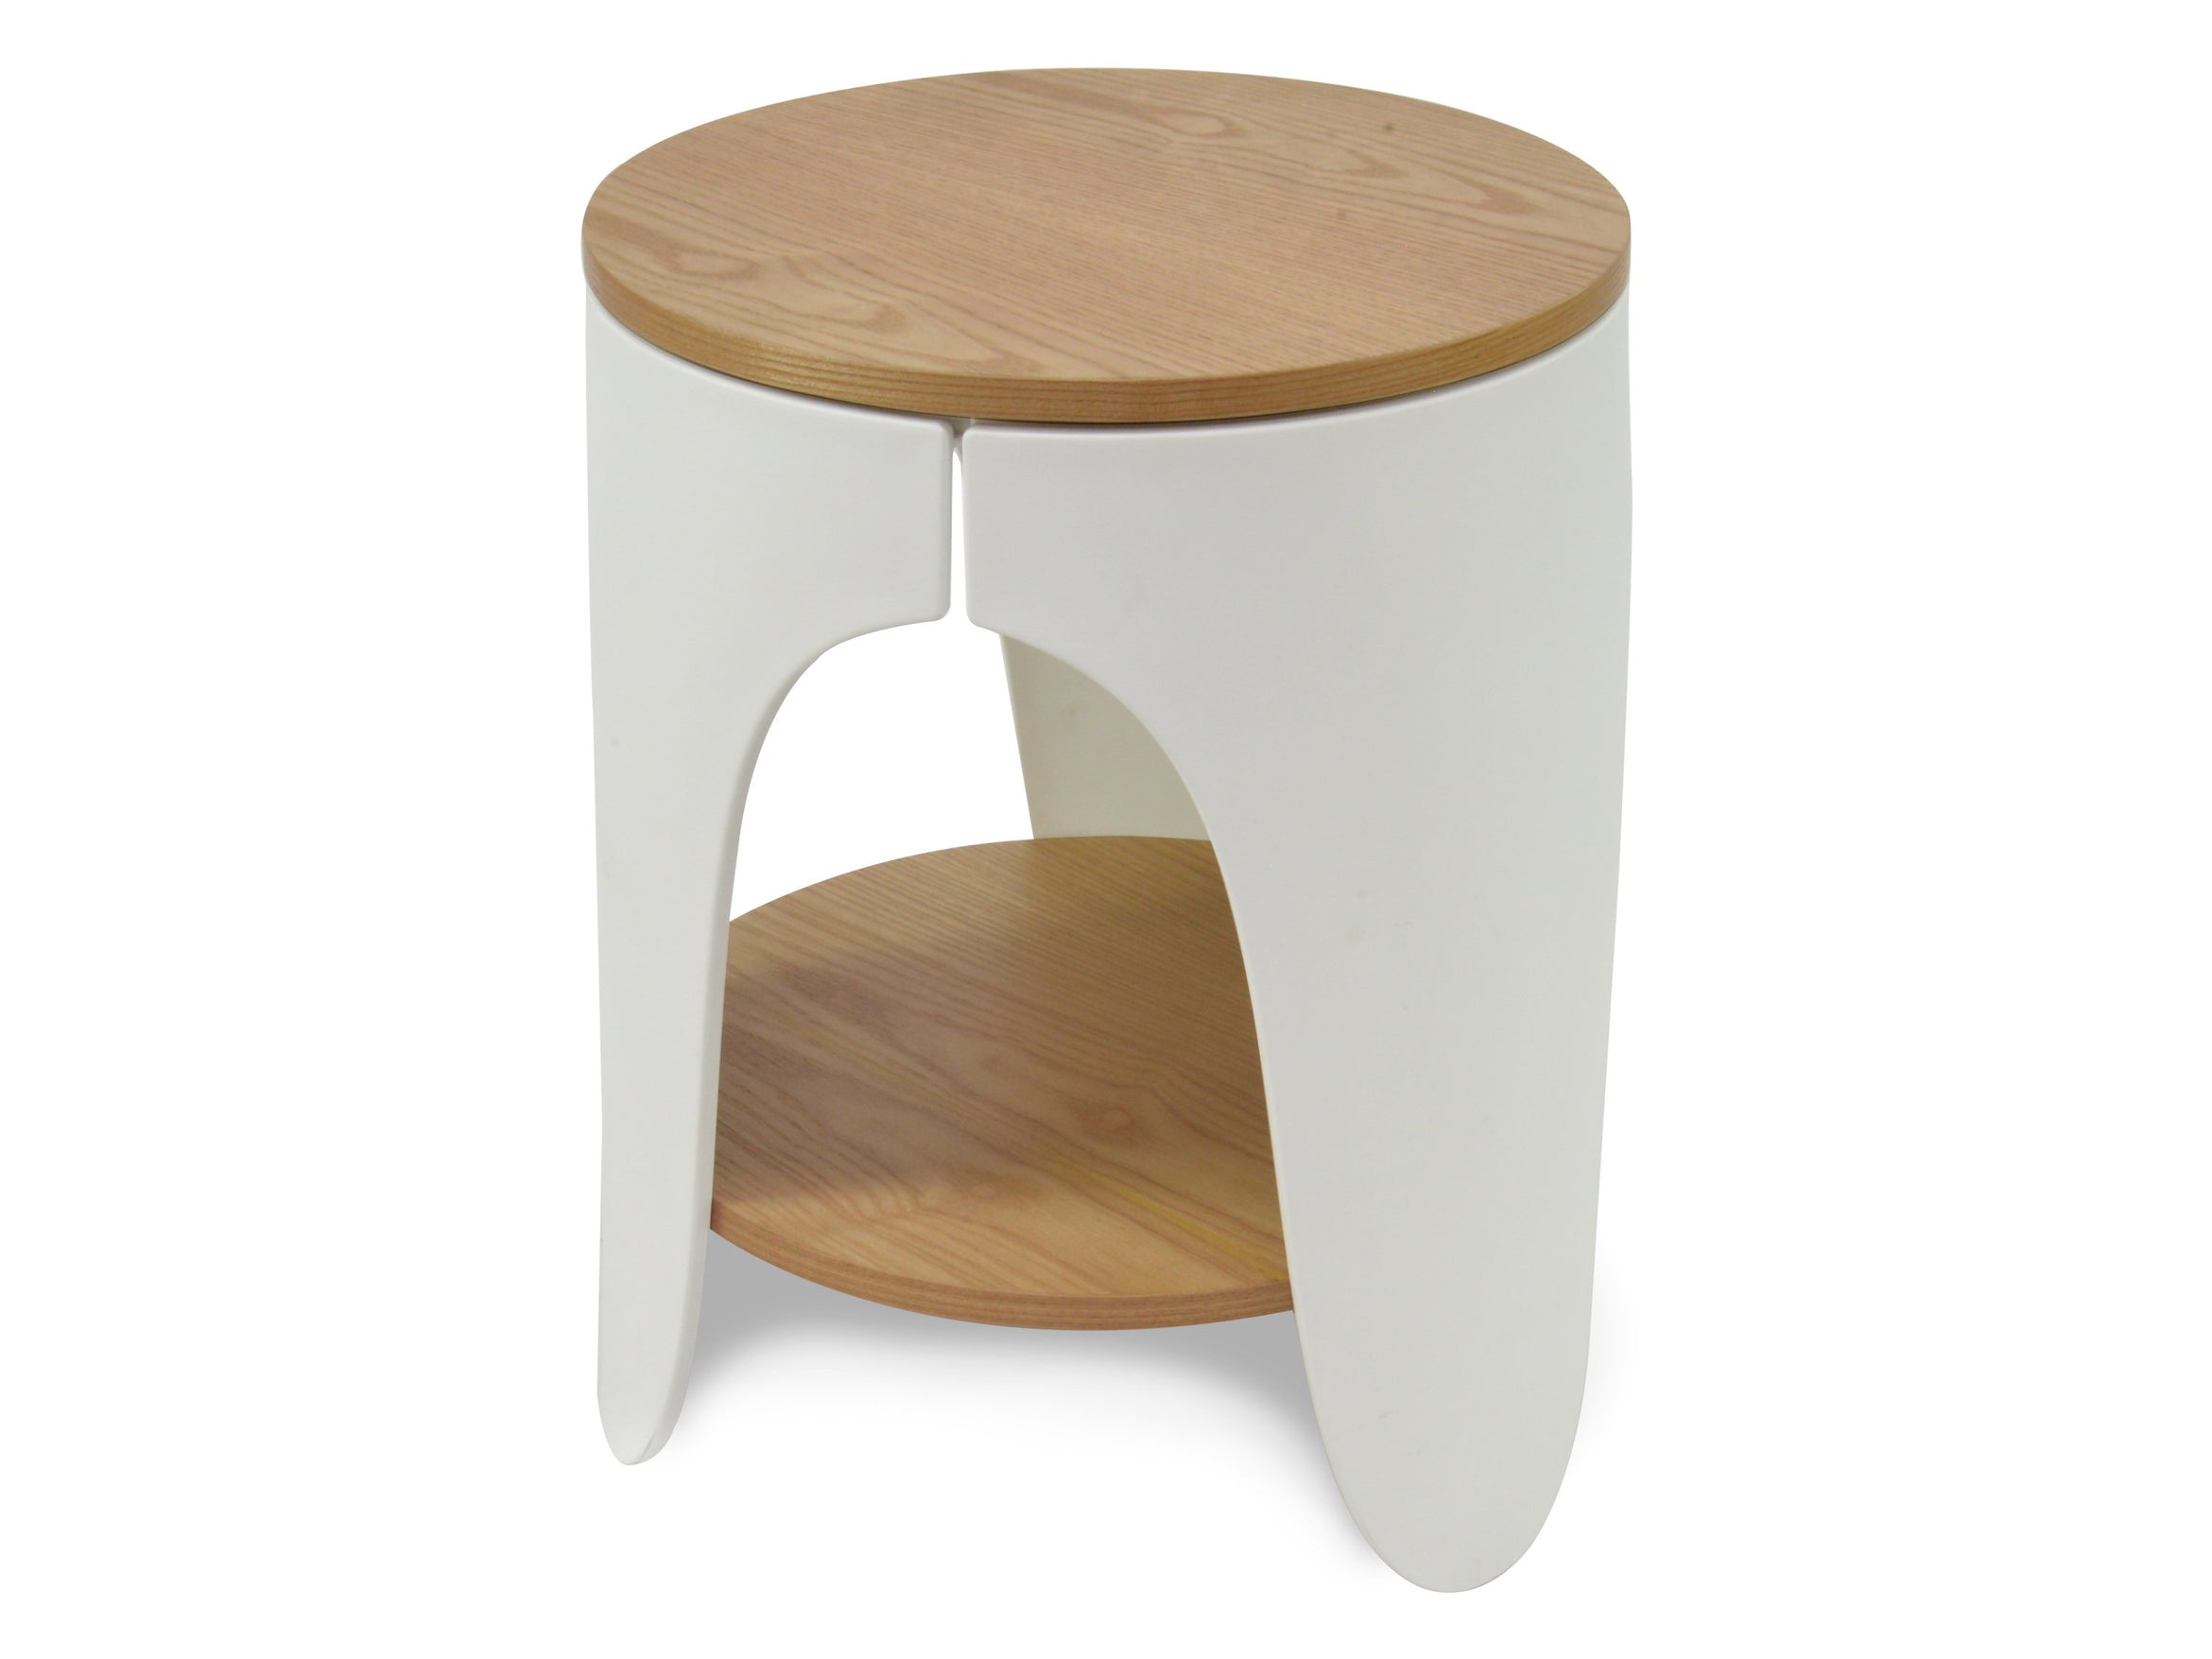 Milani Round Side Table - Natural and White - Bedside Tables